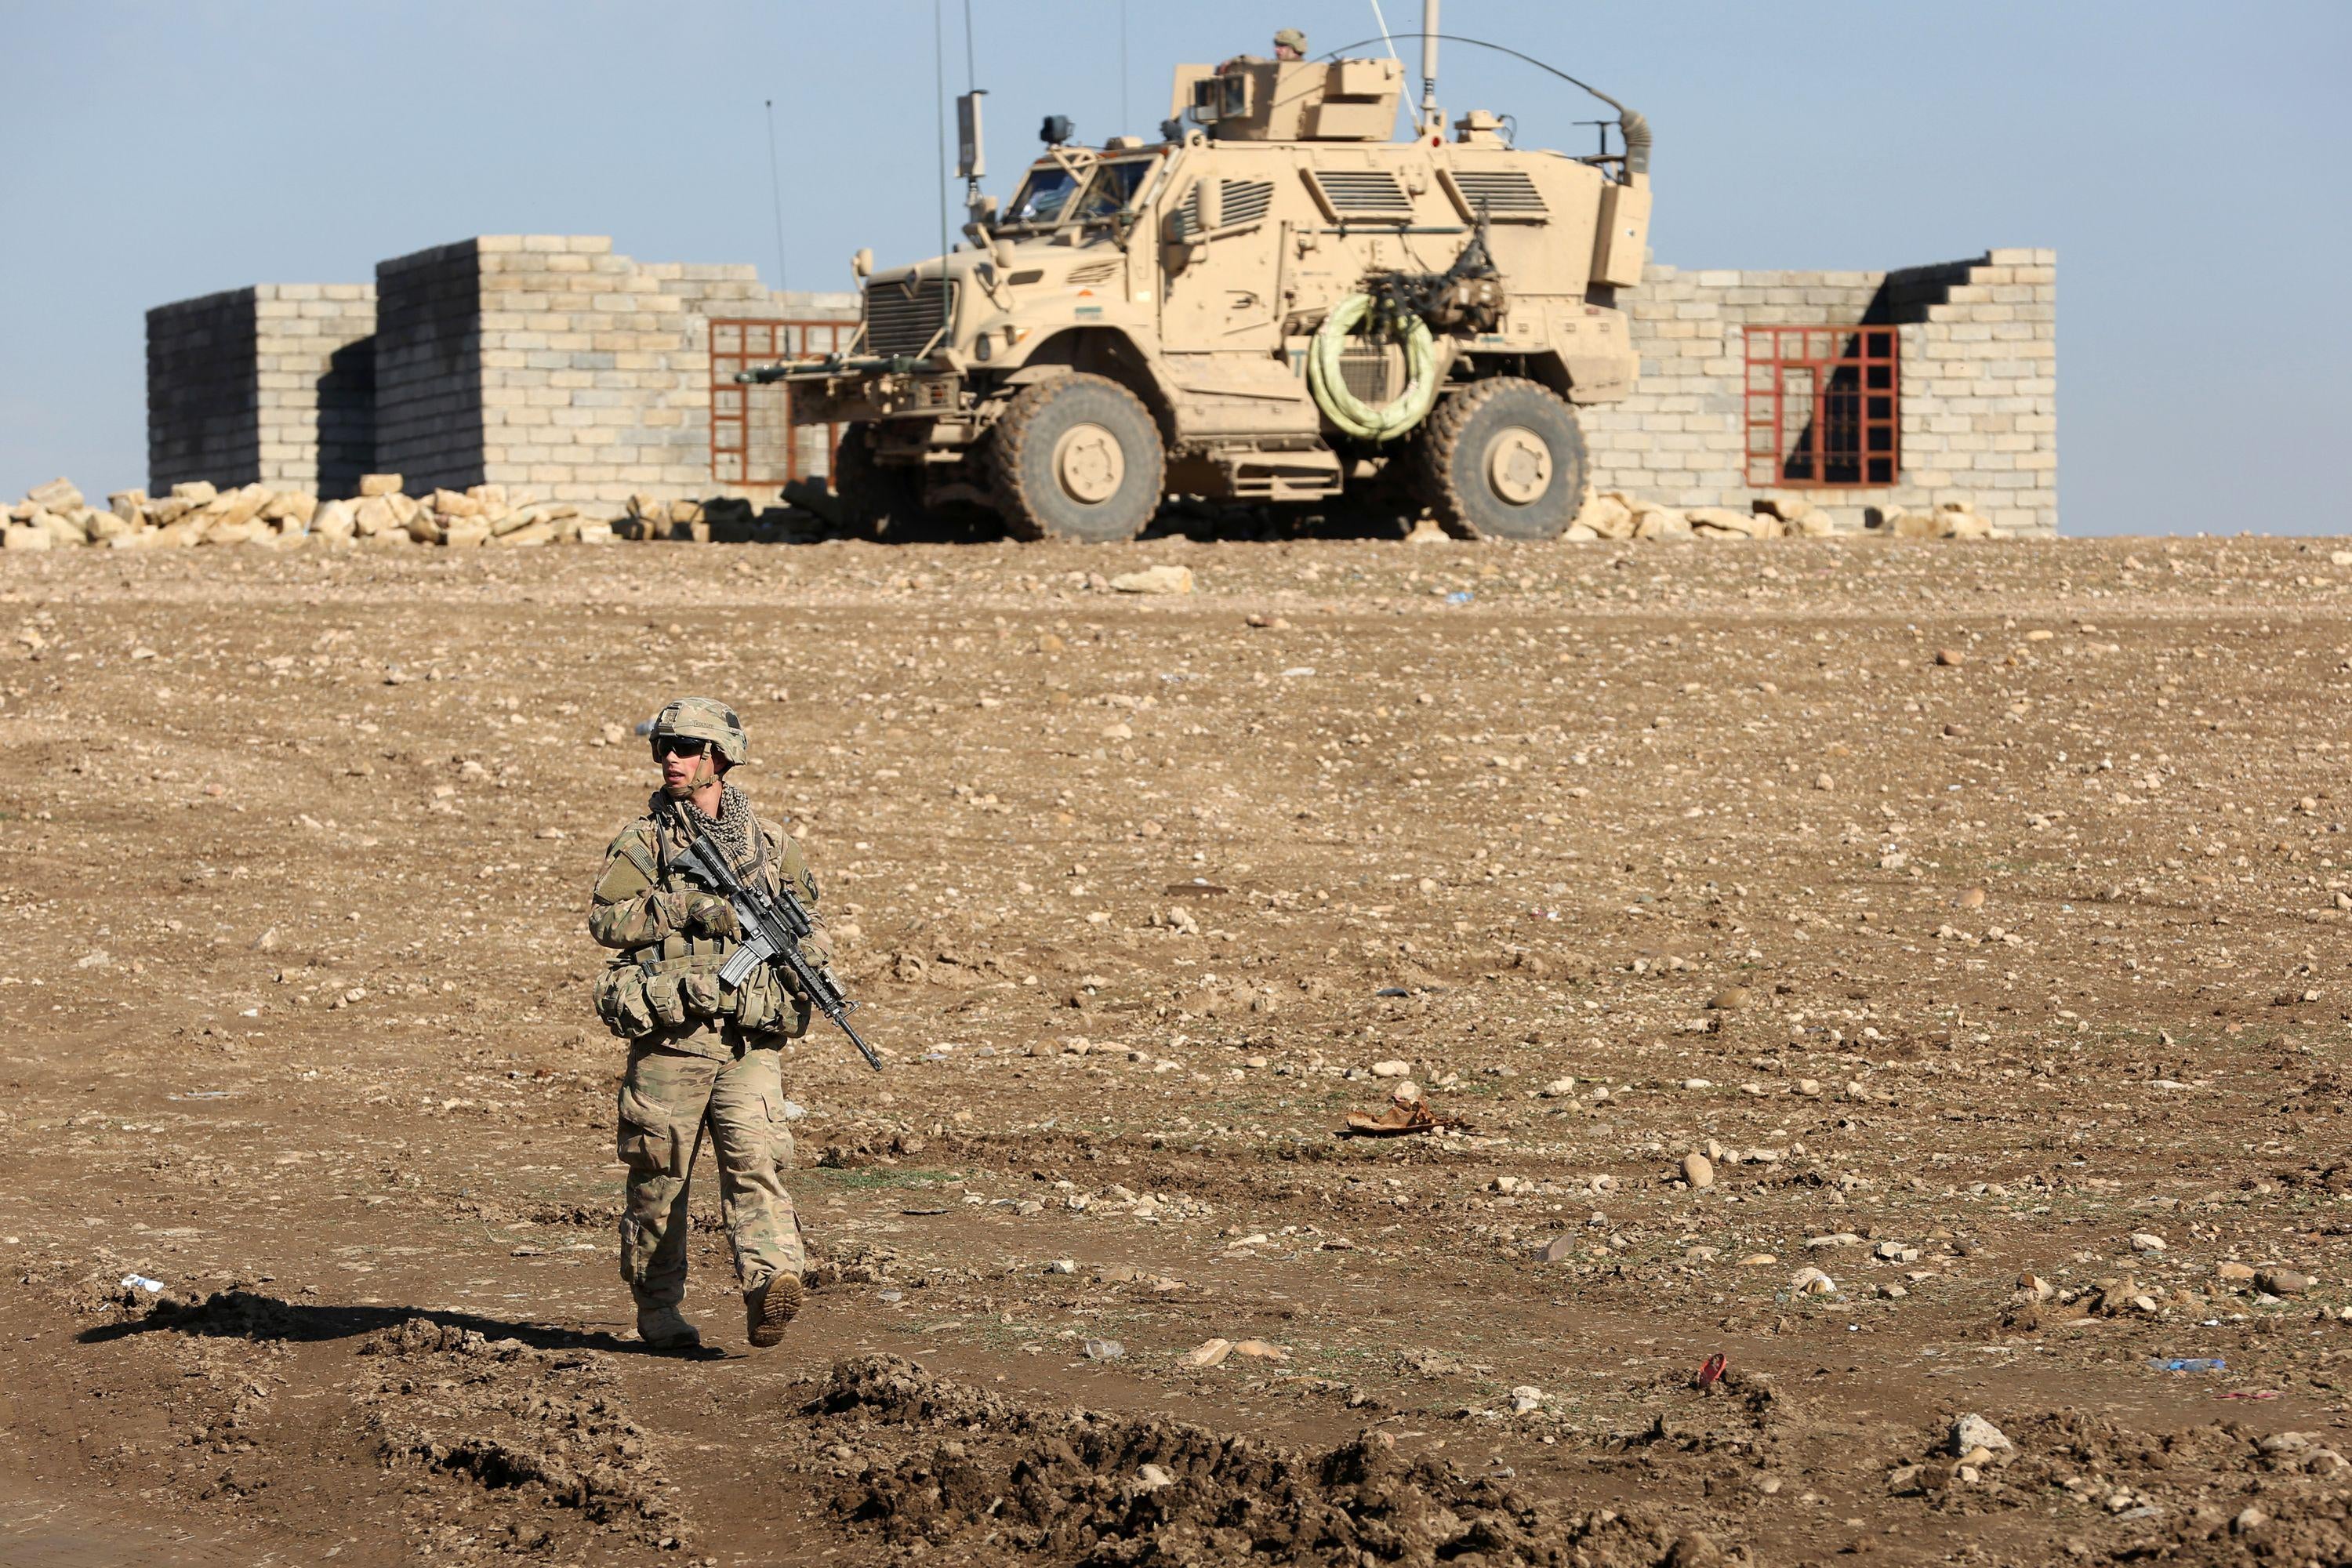 U.S. soldier on patrol with armored vehicle in stark landscape in front of small down near Mosul